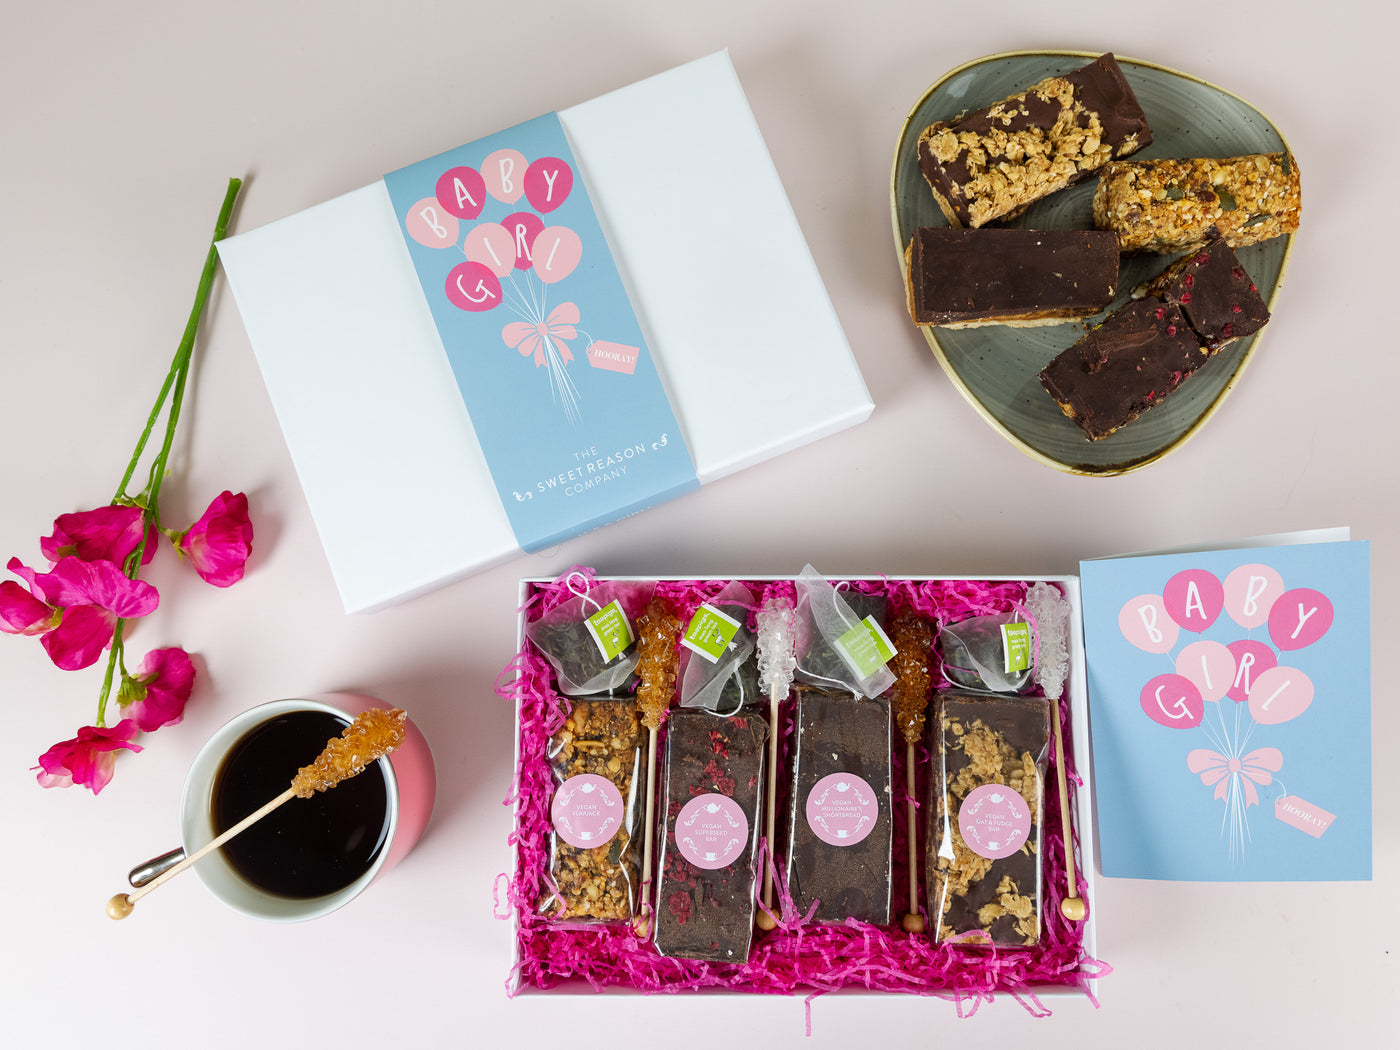 'Baby Girl' Vegan Afternoon Tea for Four Gift